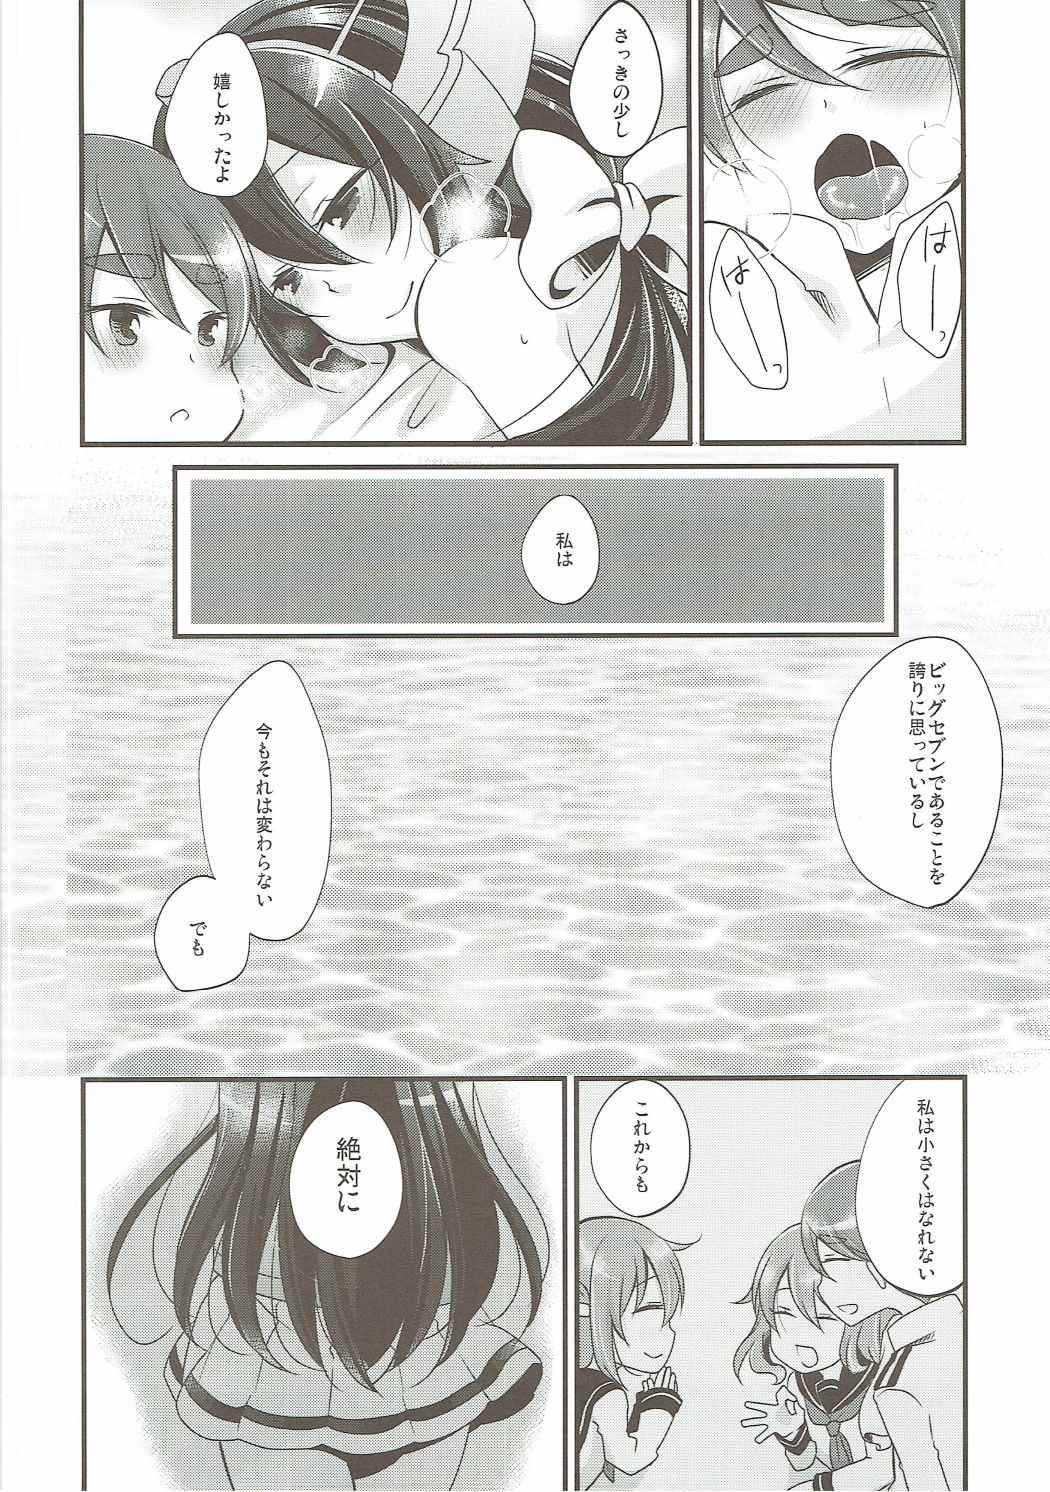 Butts Limit Complex - Kantai collection Tease - Page 9